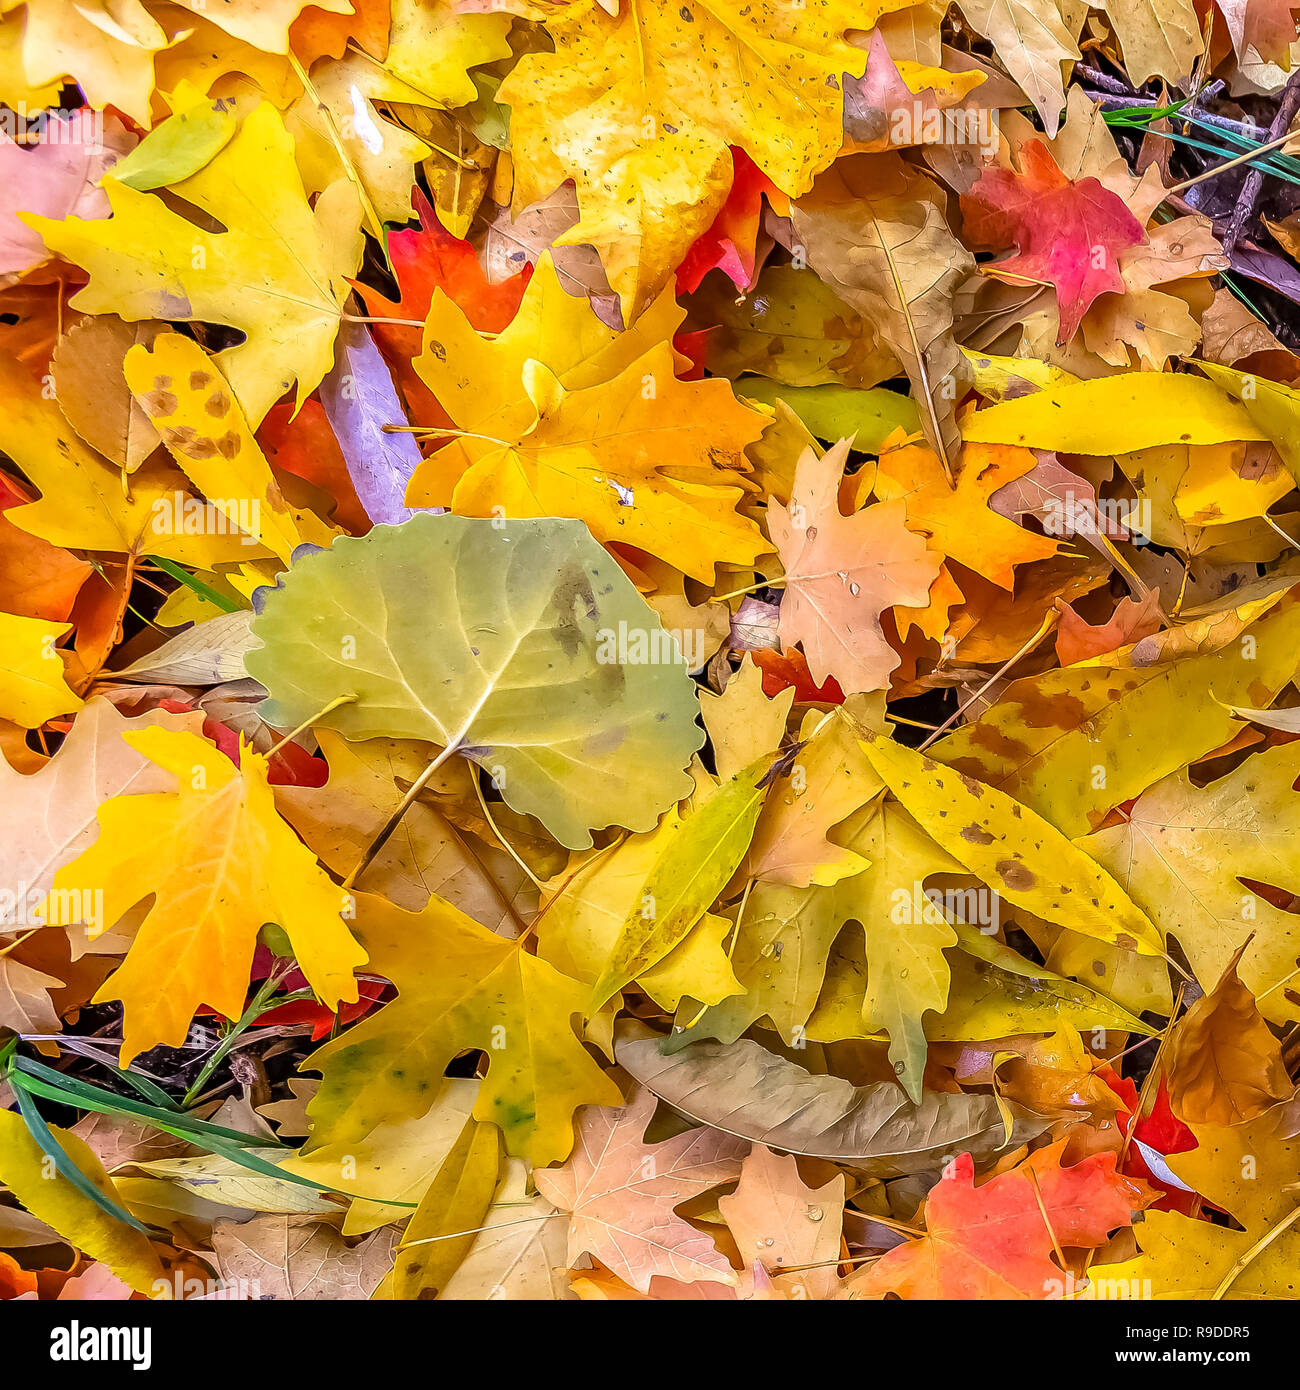 Colorful dry leaves on the ground lit by sunlight Stock Photo